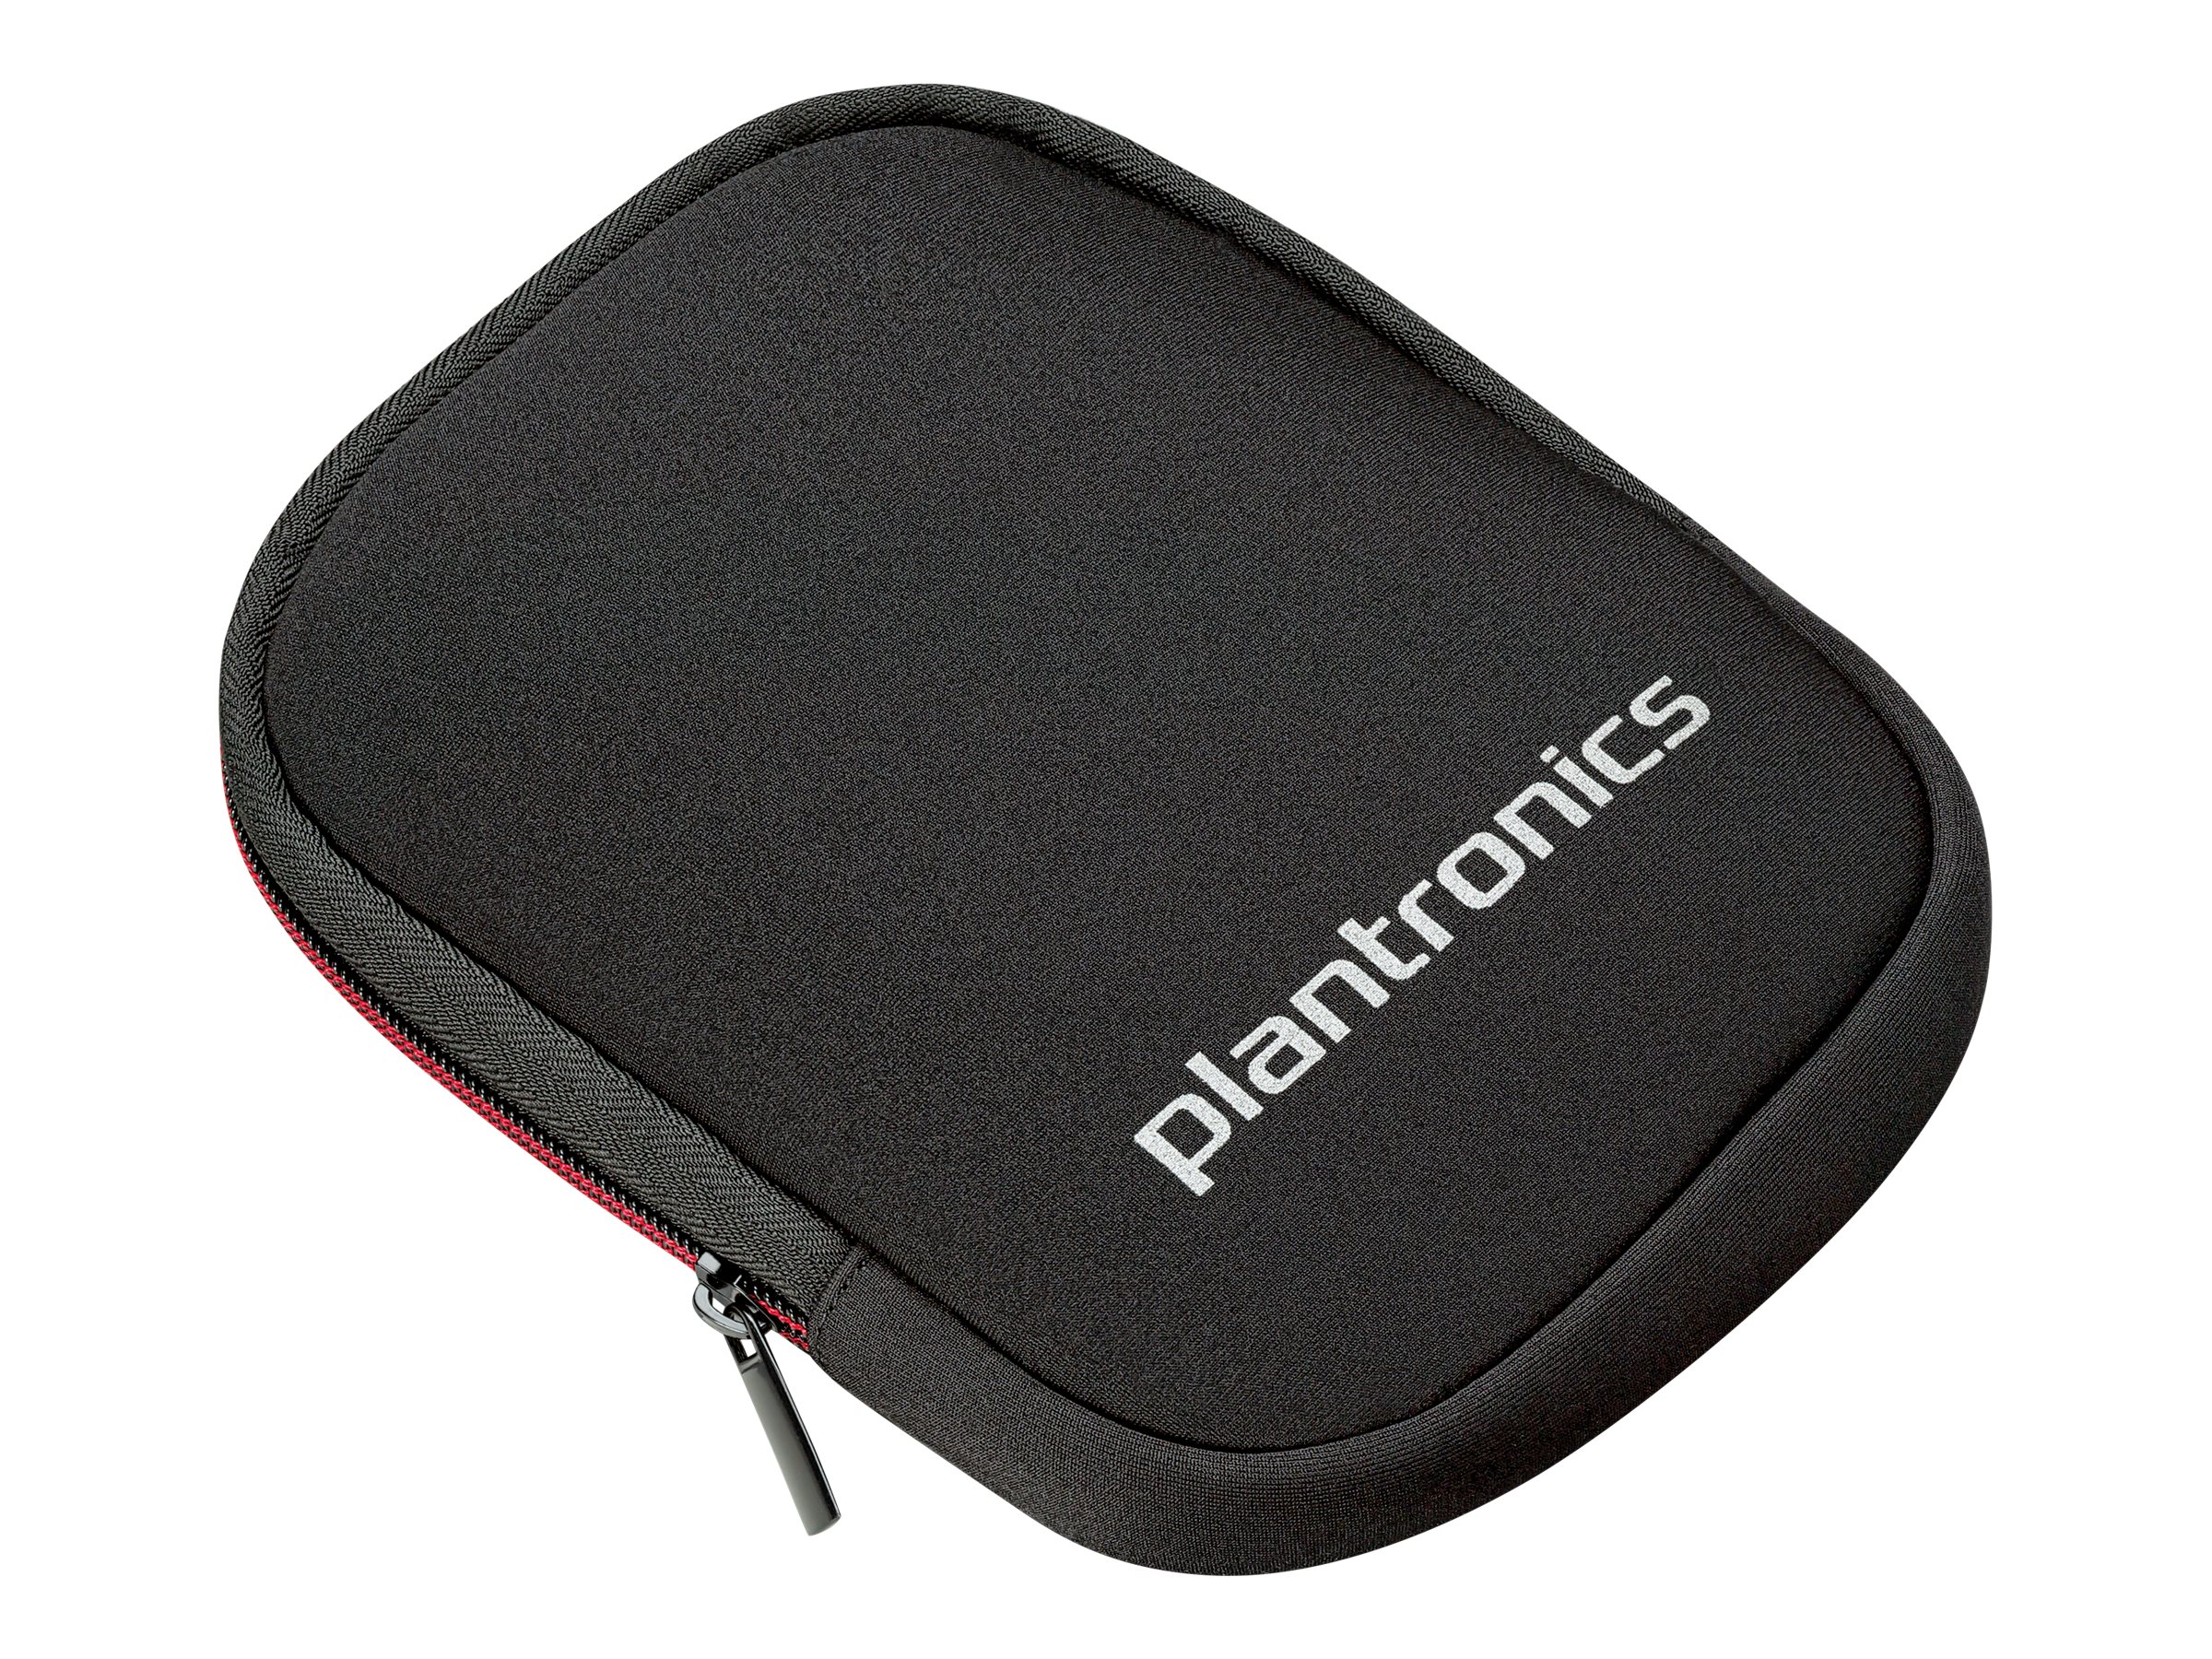 Plantronics Voyager Focus UC no stand Stereo Bluetooth headset with Active Noise Canceling (ANC) - image 5 of 10